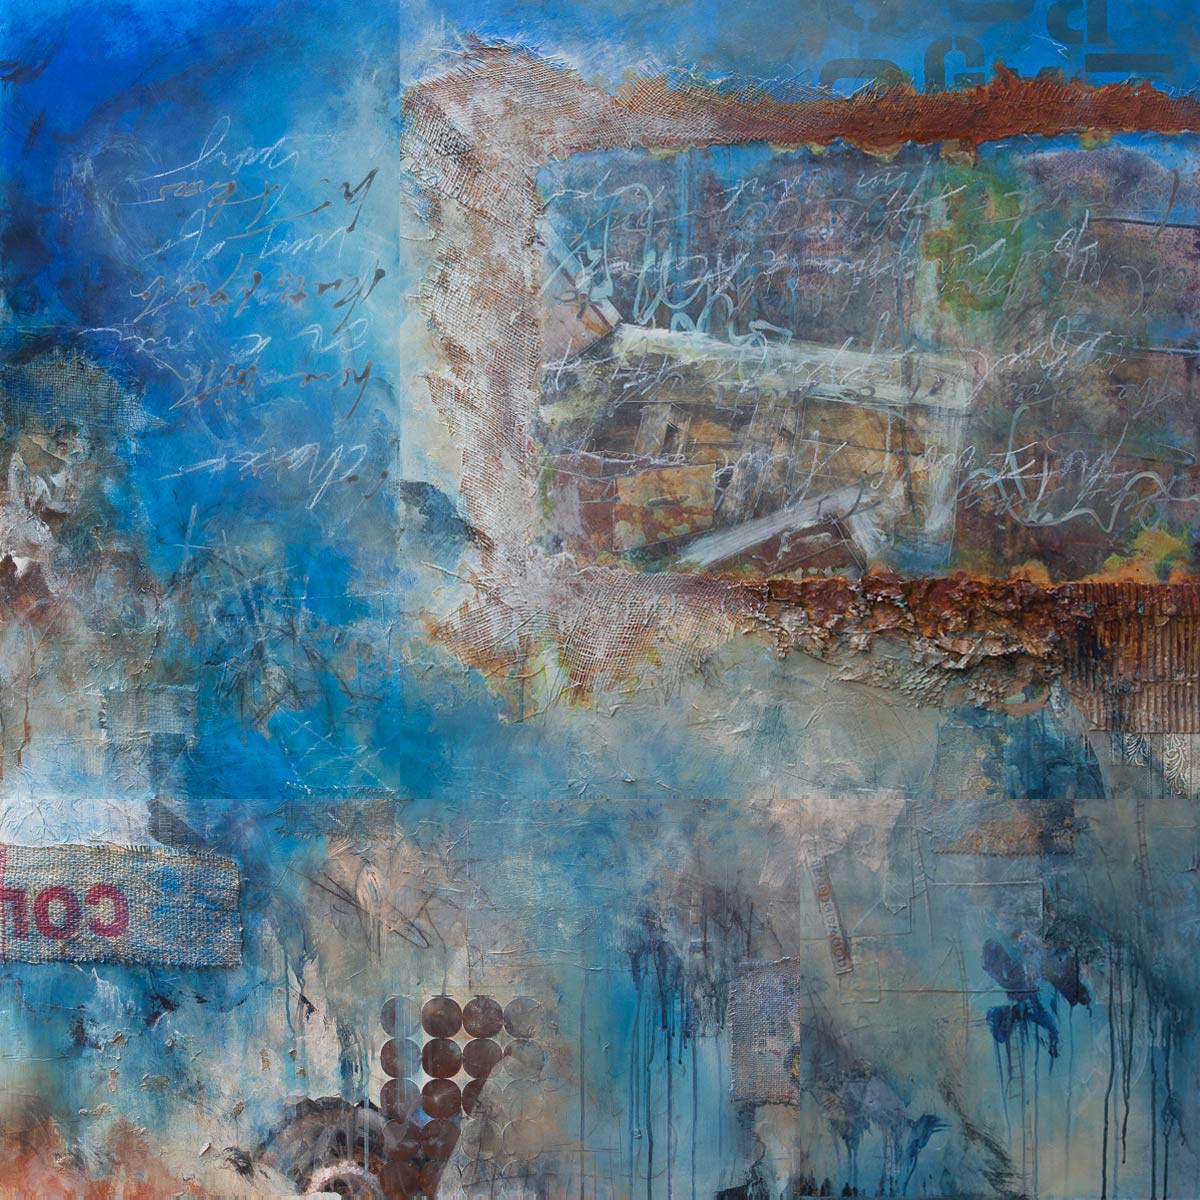 Unfinished Business, 2015, quadriptych, mixed media on wood, 54" x 54"